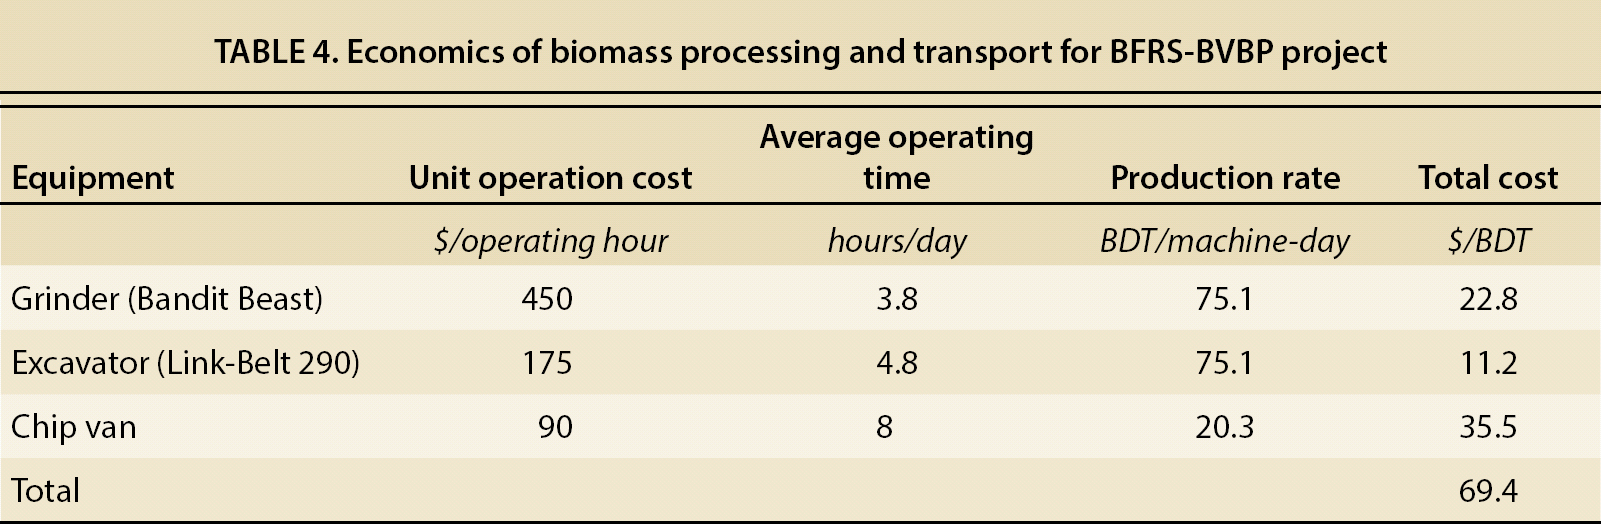 Economics of biomass processing and transport for BFRS-BVBP project